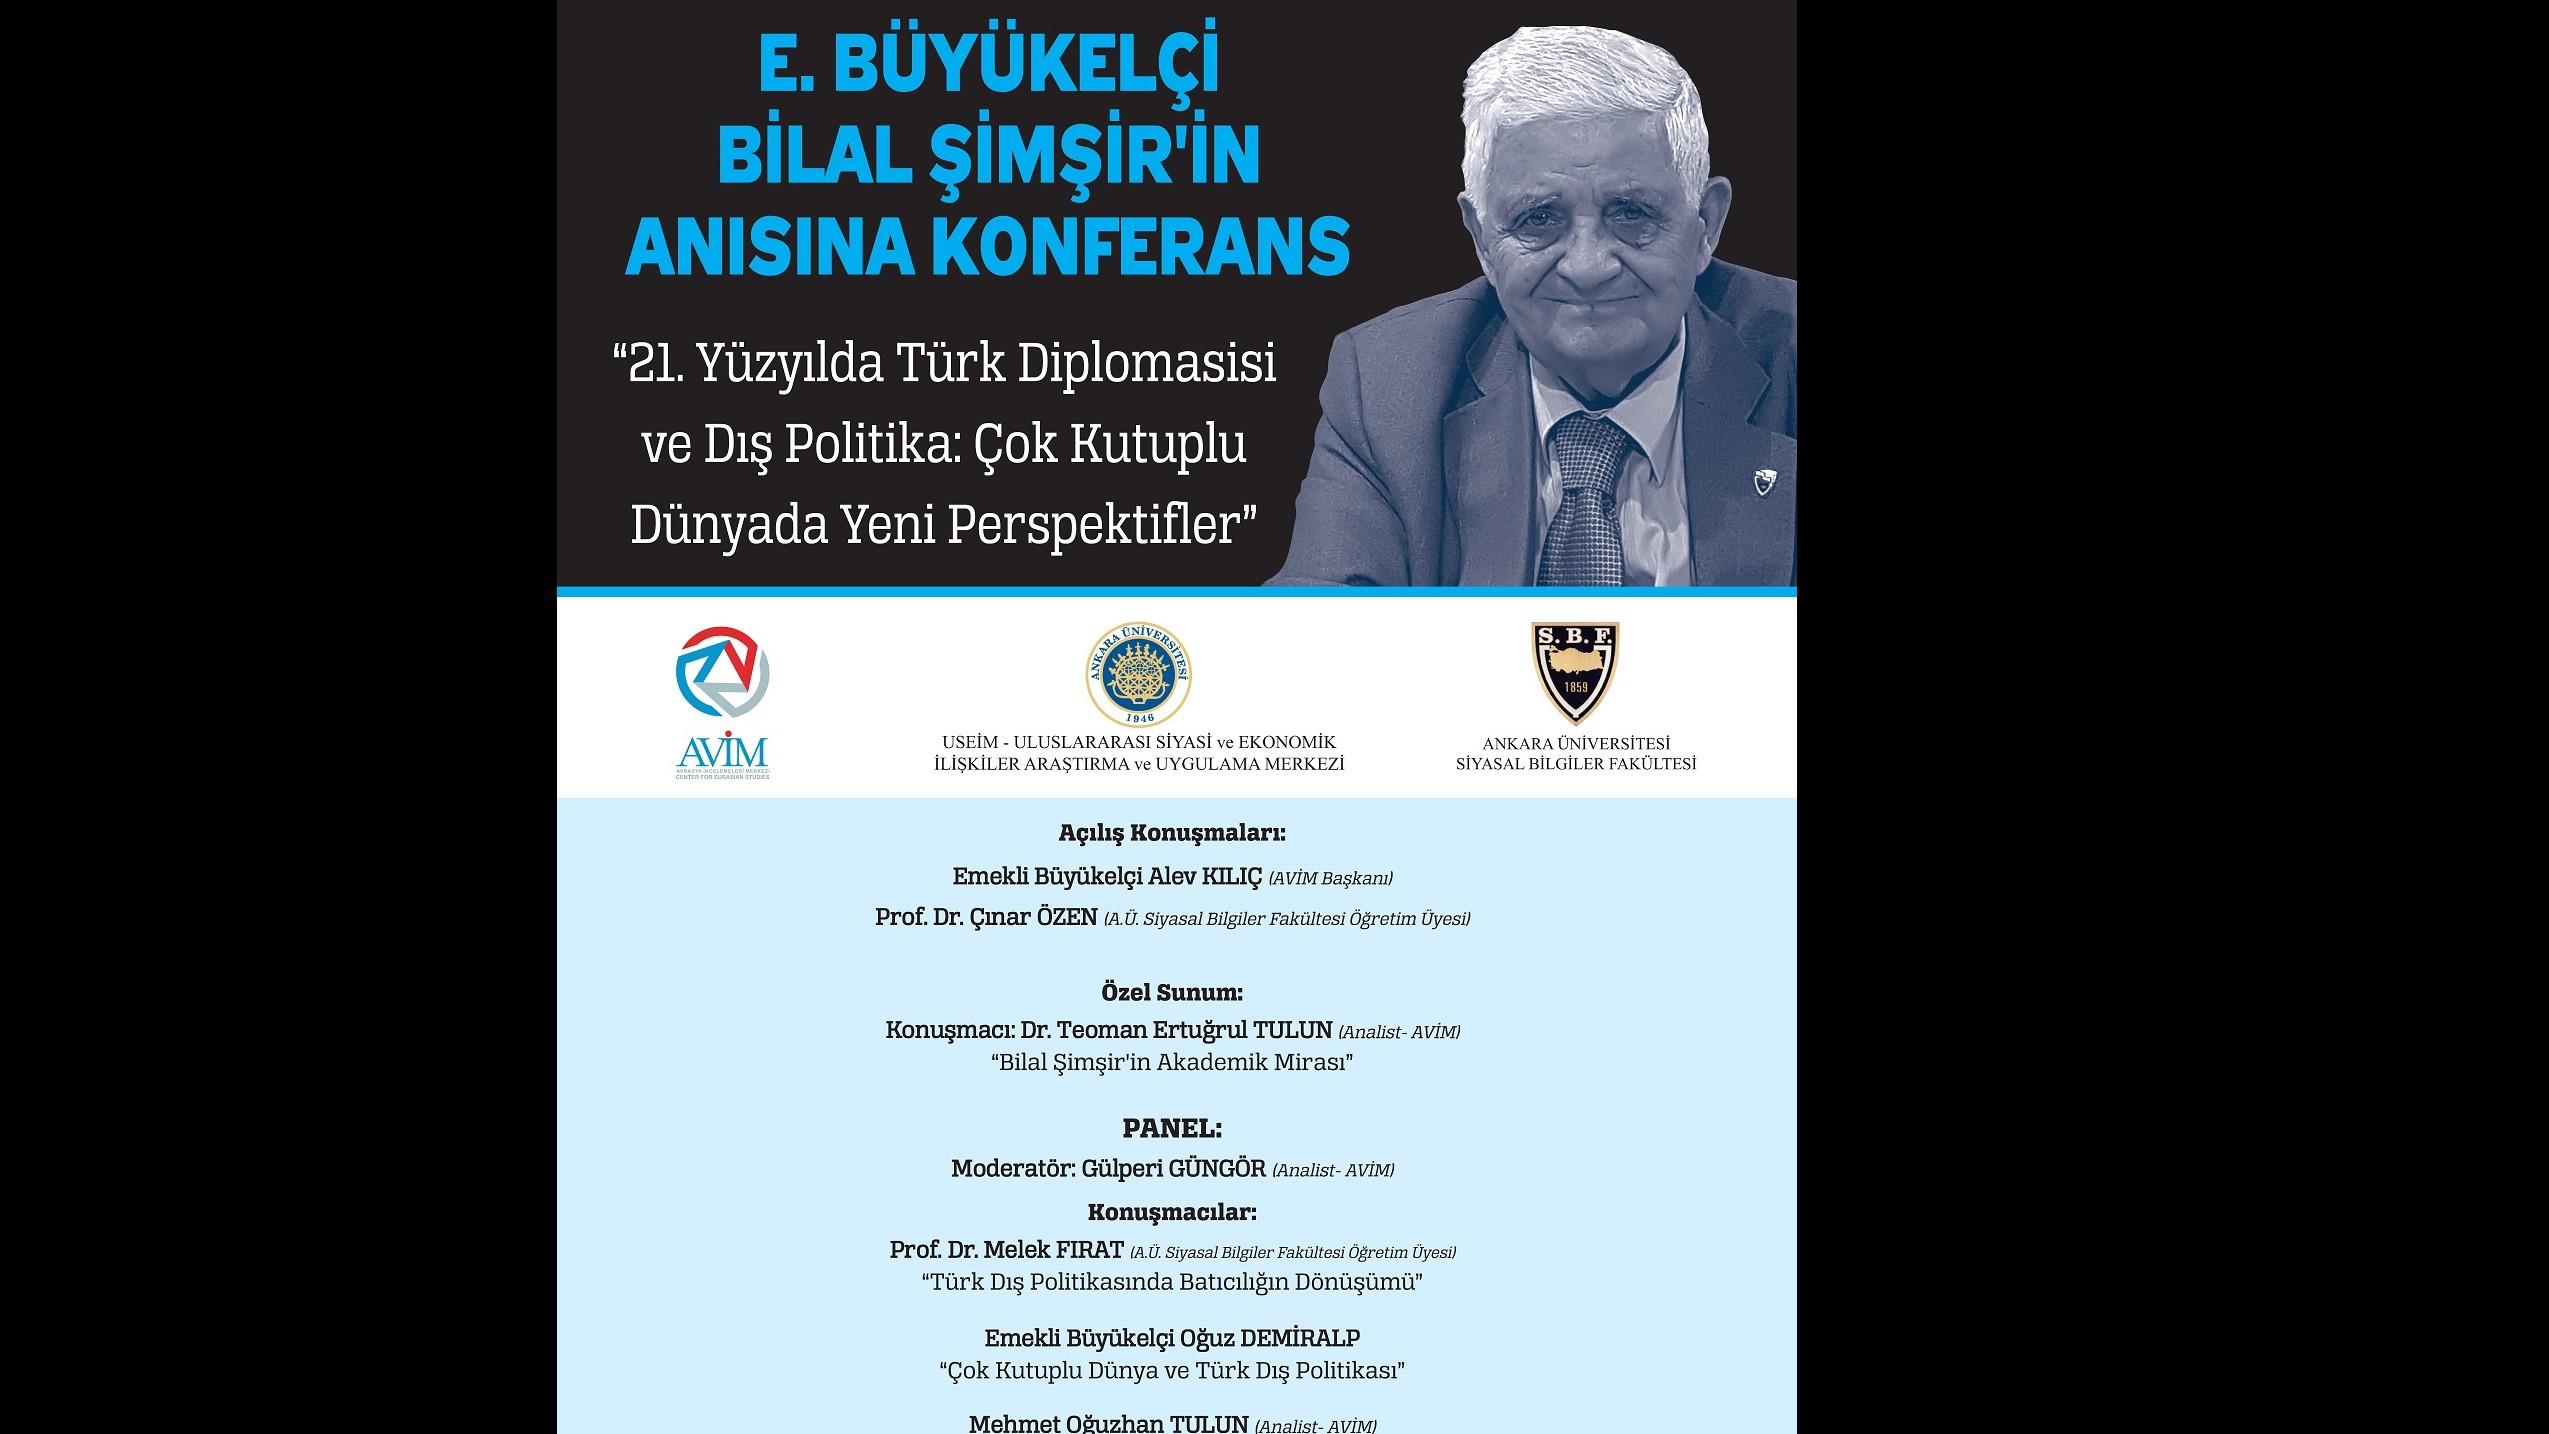 COMMENTARY: AN EXEMPLARY FIGURE IN DIPLOMACY AND HISTORY: IN MEMORY OF RETIRED AMBASSADOR BİLAL ŞİMŞİR